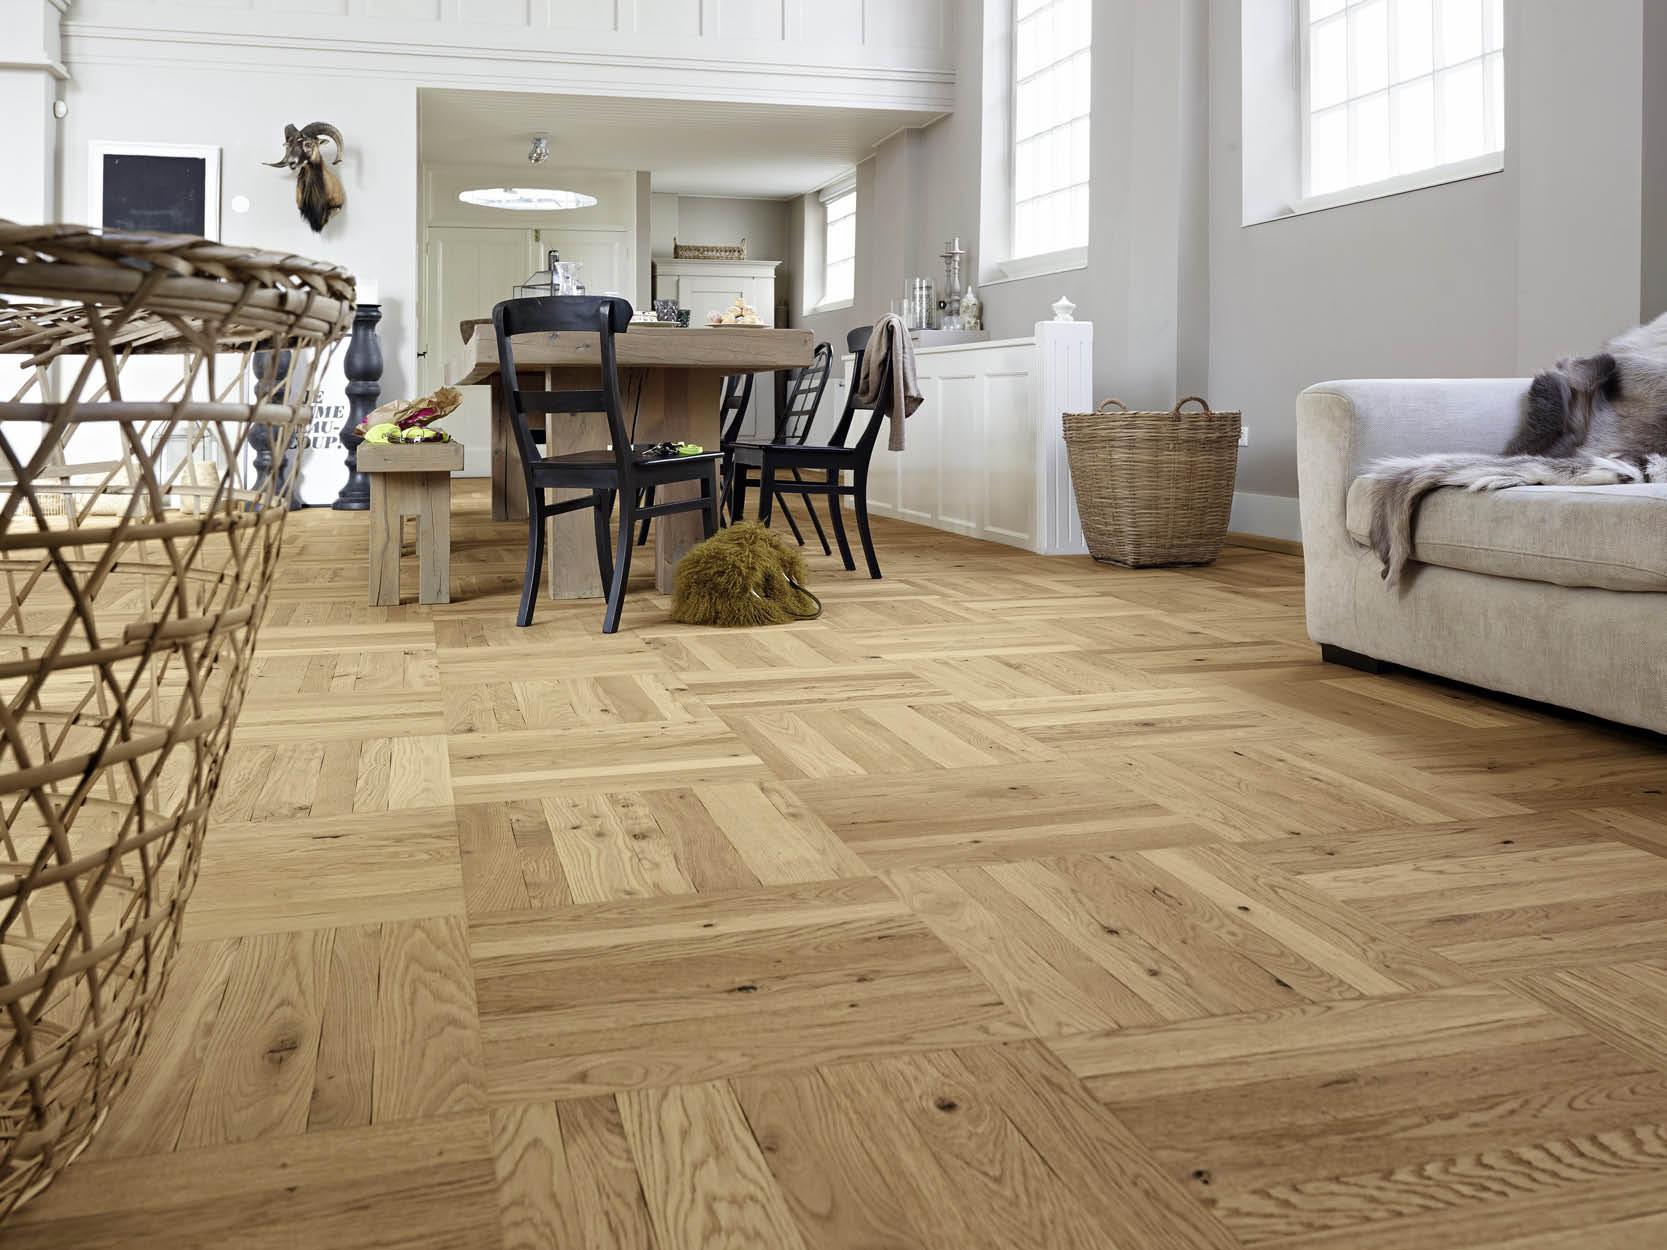 How To Choose Parquet Tiles And Wood Floors For Your Home